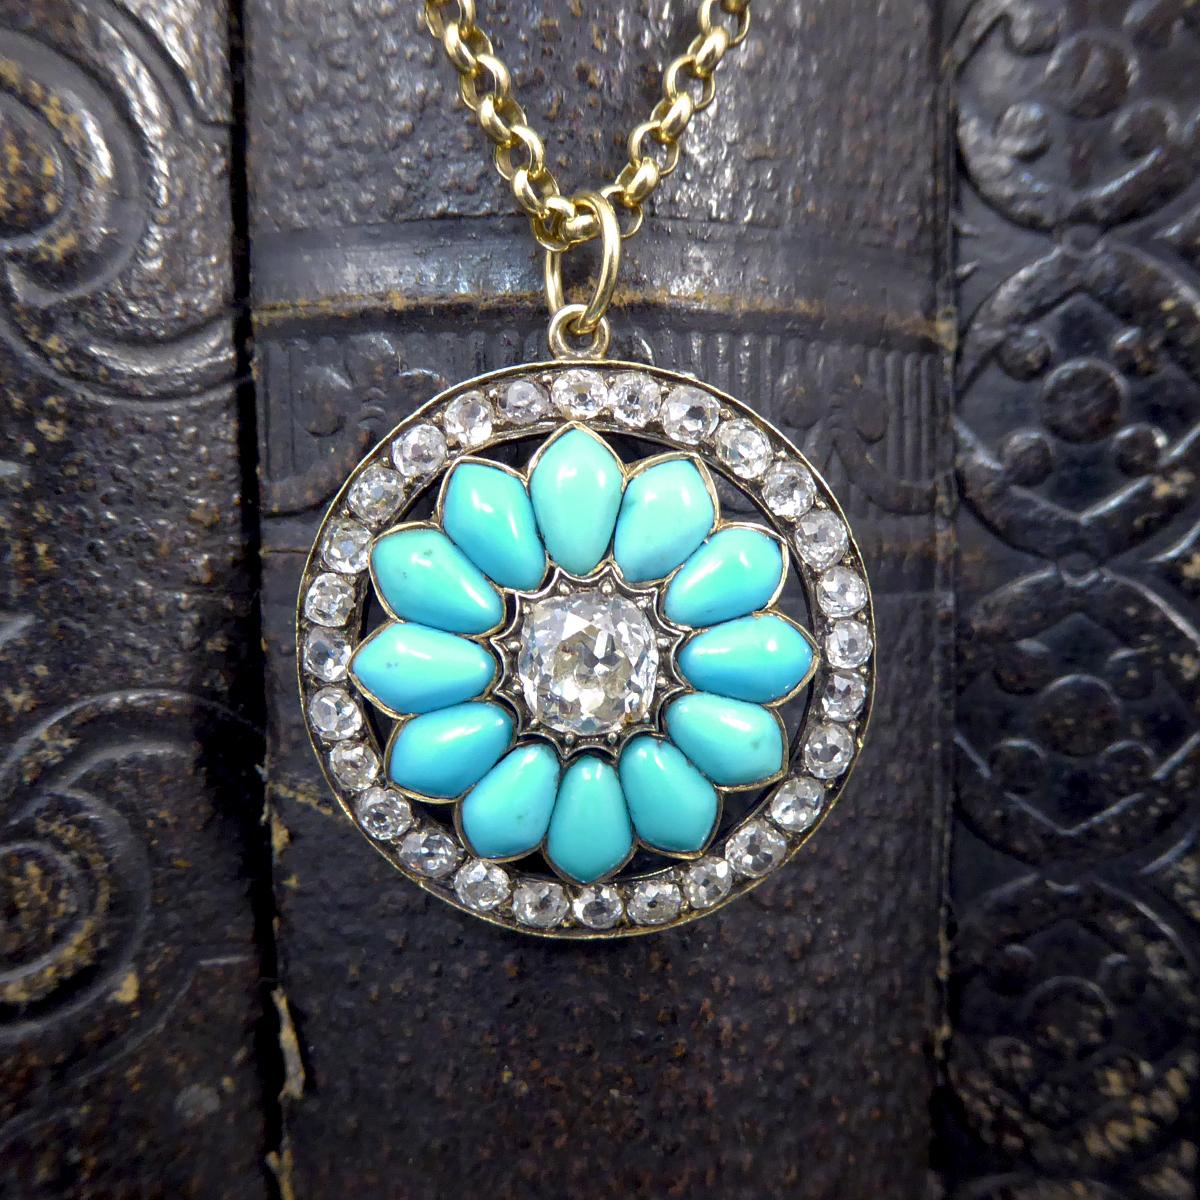 This gorgeous quality antique pendant holds a cushion cut Diamond weighing 1.20ct in the centre of the flower with turquoise stones as its petals. With a circular surround of old cut Diamonds there is a total of 3.20ct all set in 15ct Gold. The